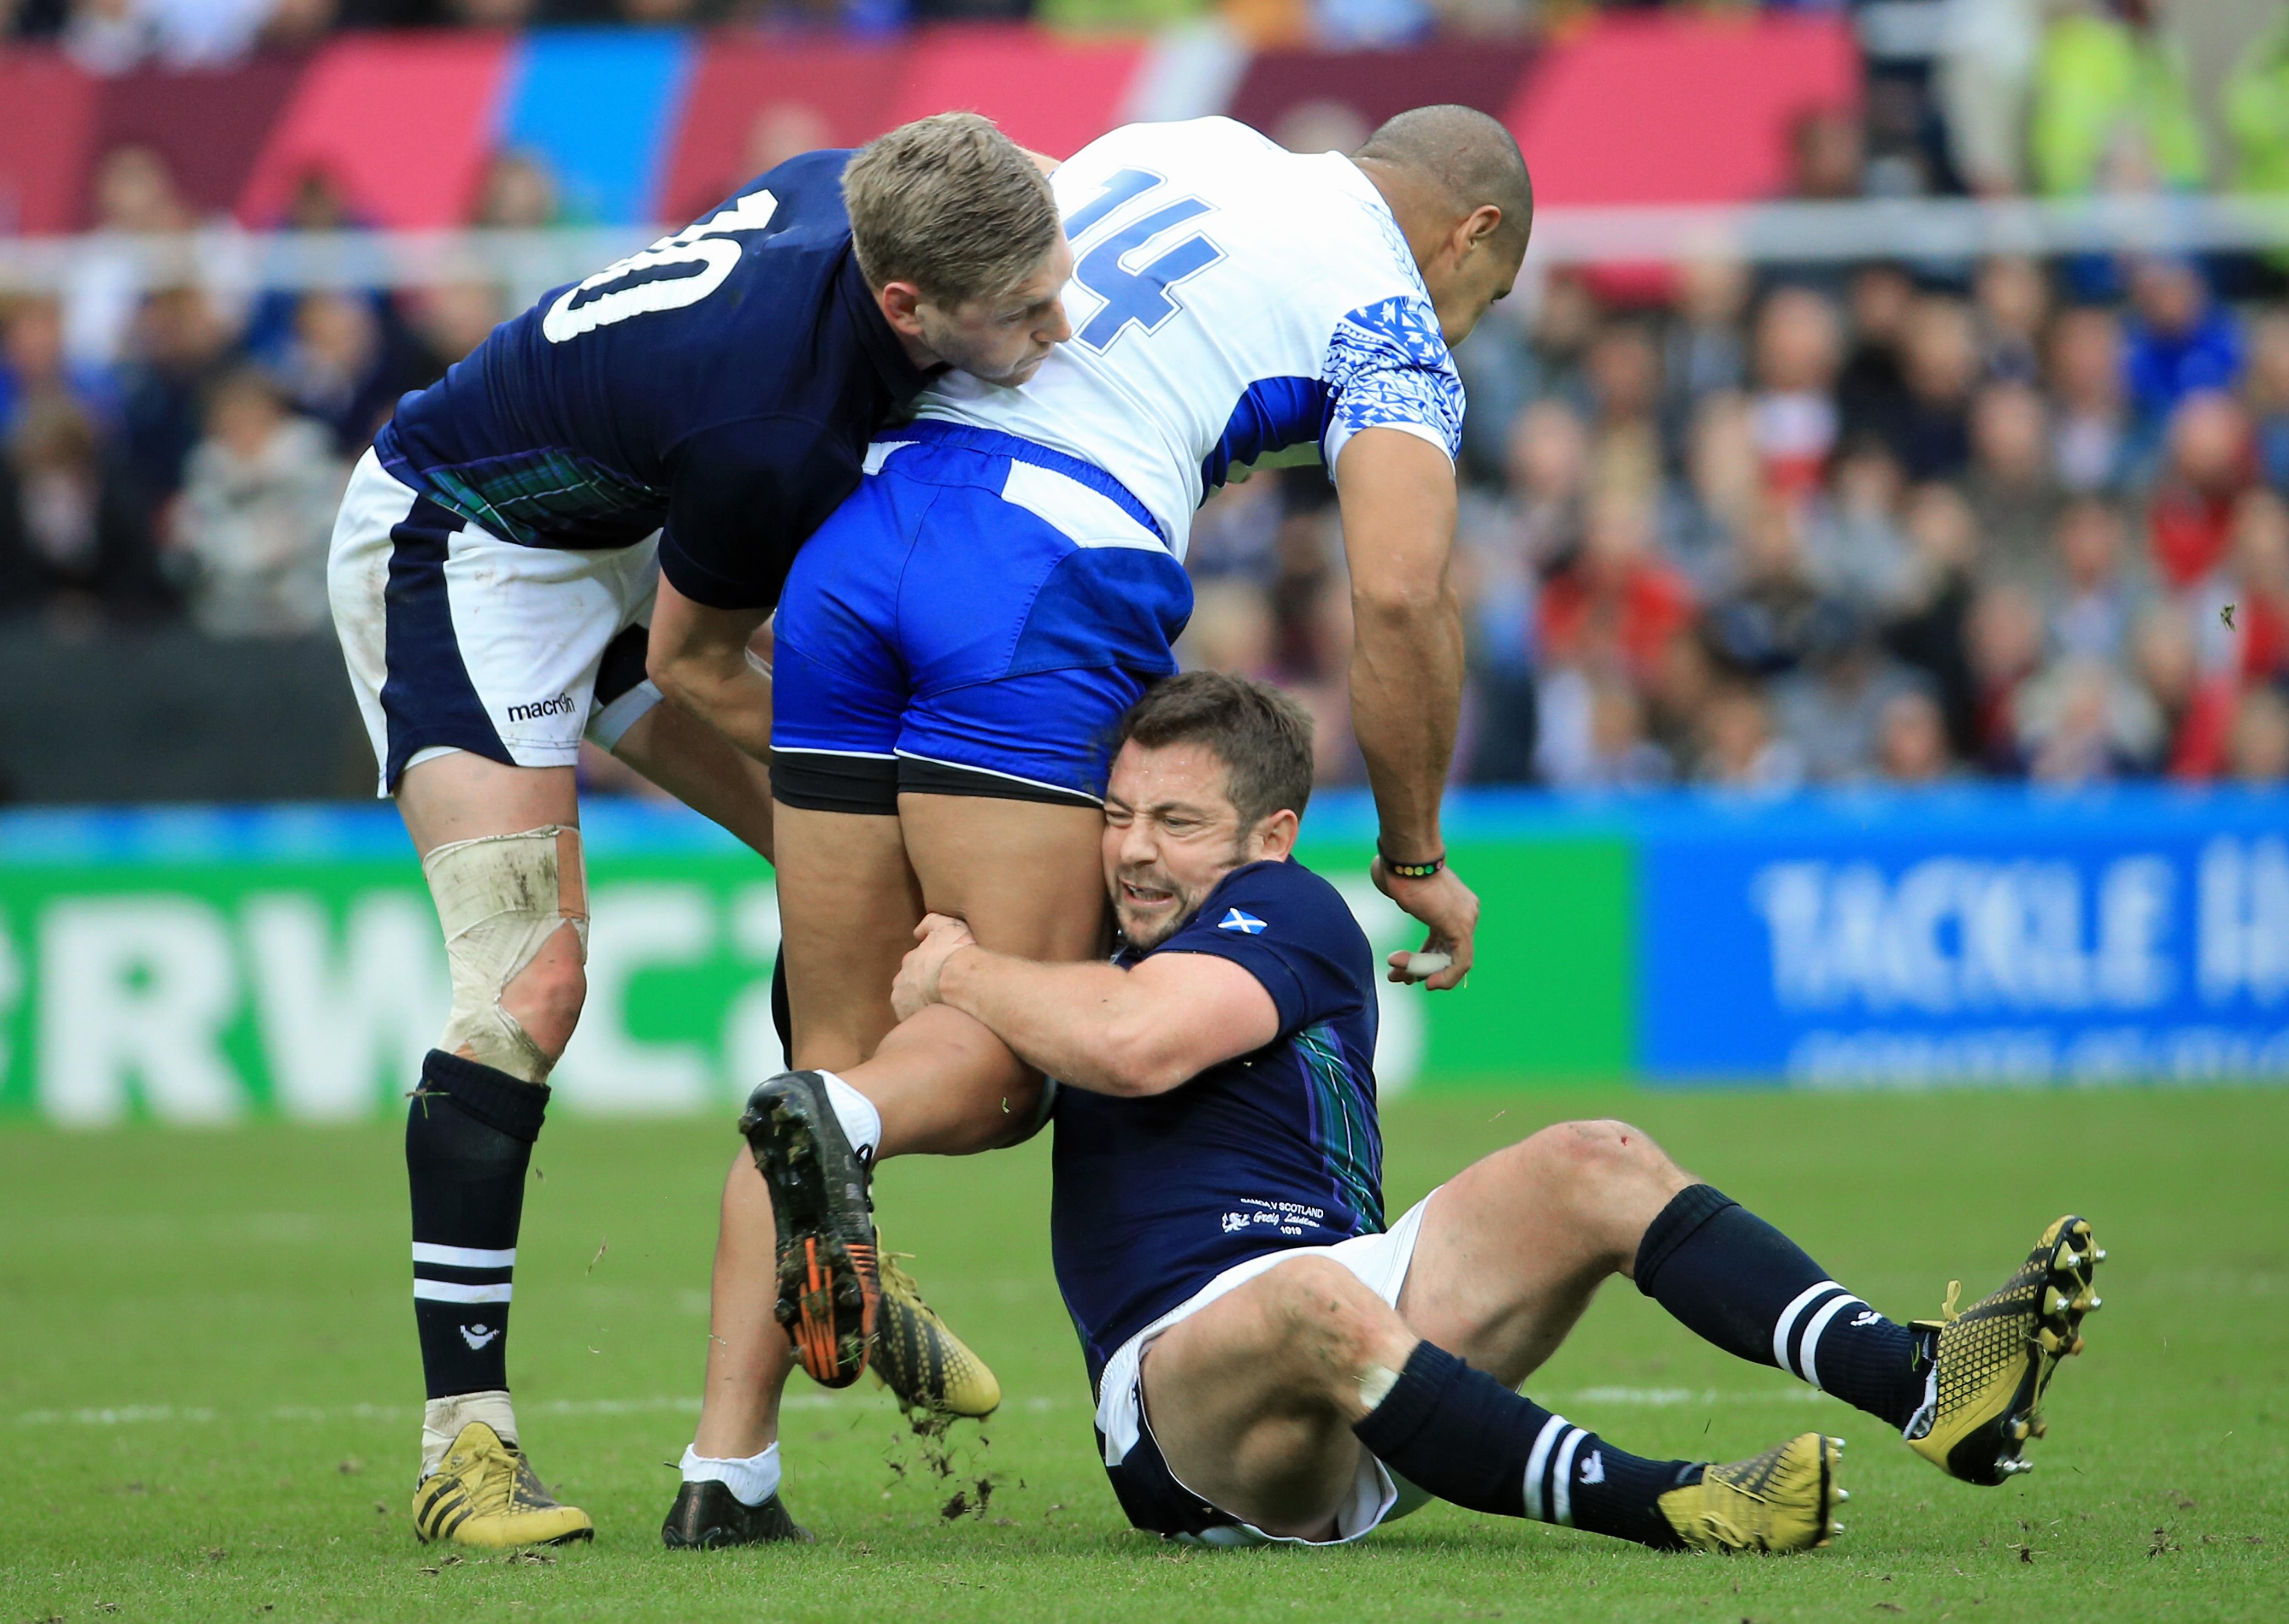 Greig Laidlaw and Finn Russell combine to stop Samoan winger Paul Perez in October 2015.